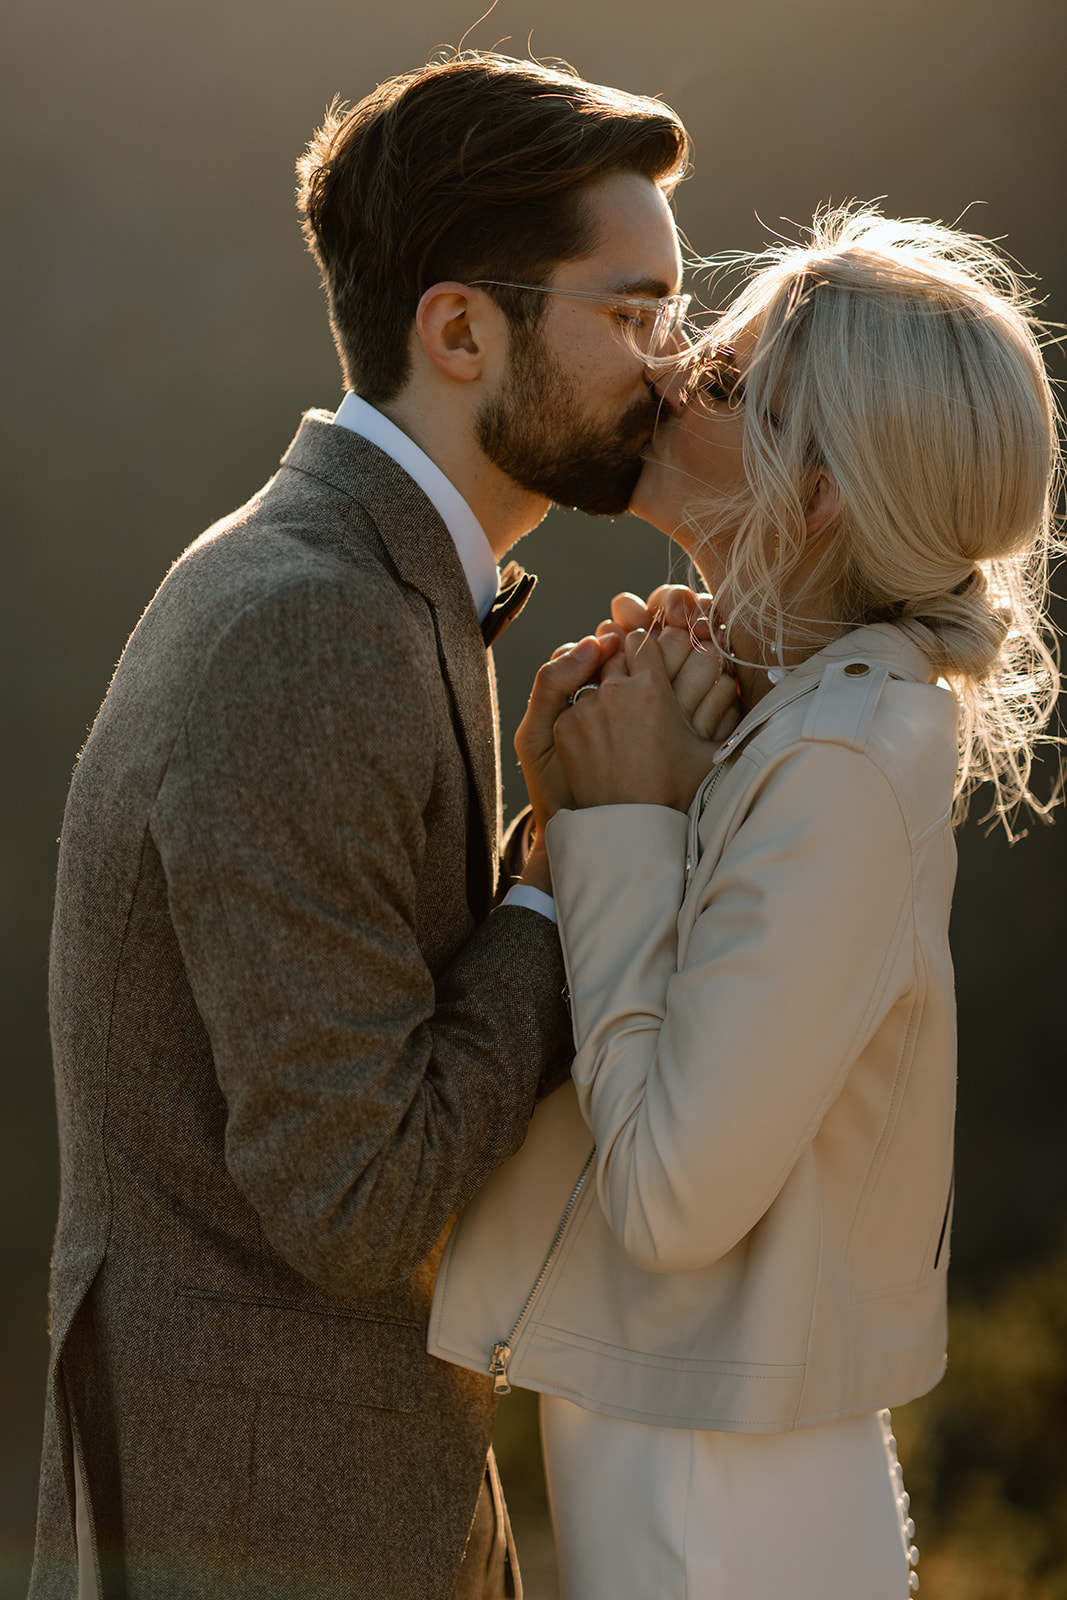 Bubble rock elopement and vows in the Fall. Acadia national park elopement and microwedding.